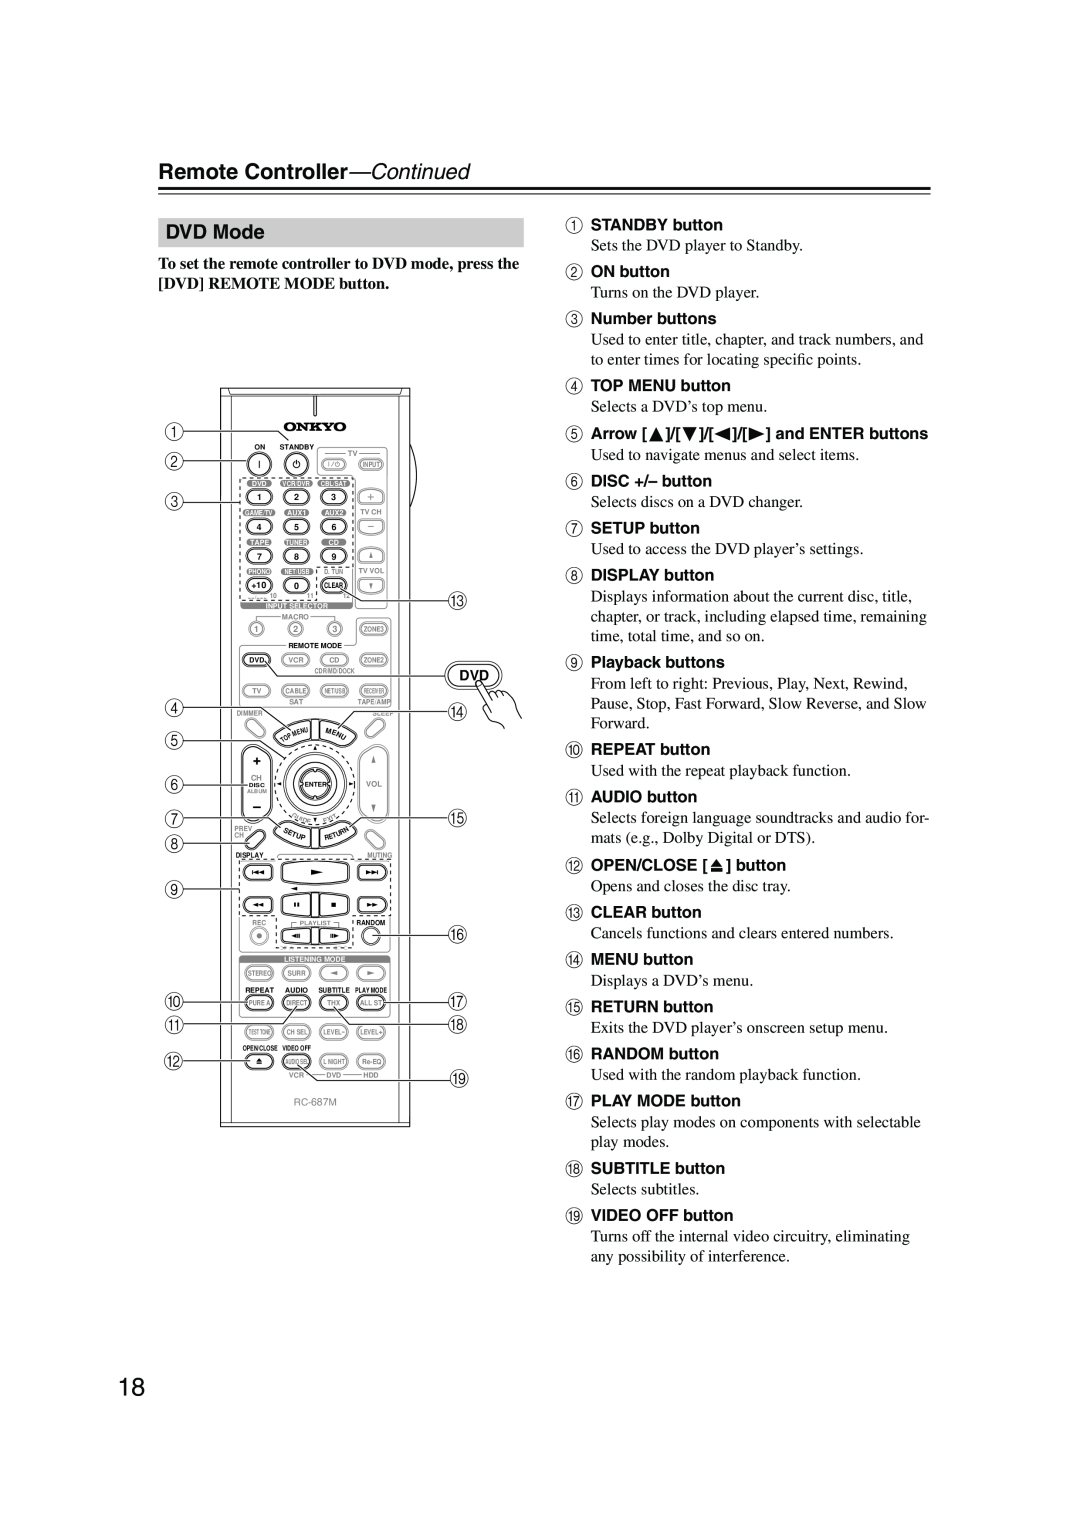 Onkyo TX-NR905 instruction manual DVD Mode, Remote Controller—Continued 